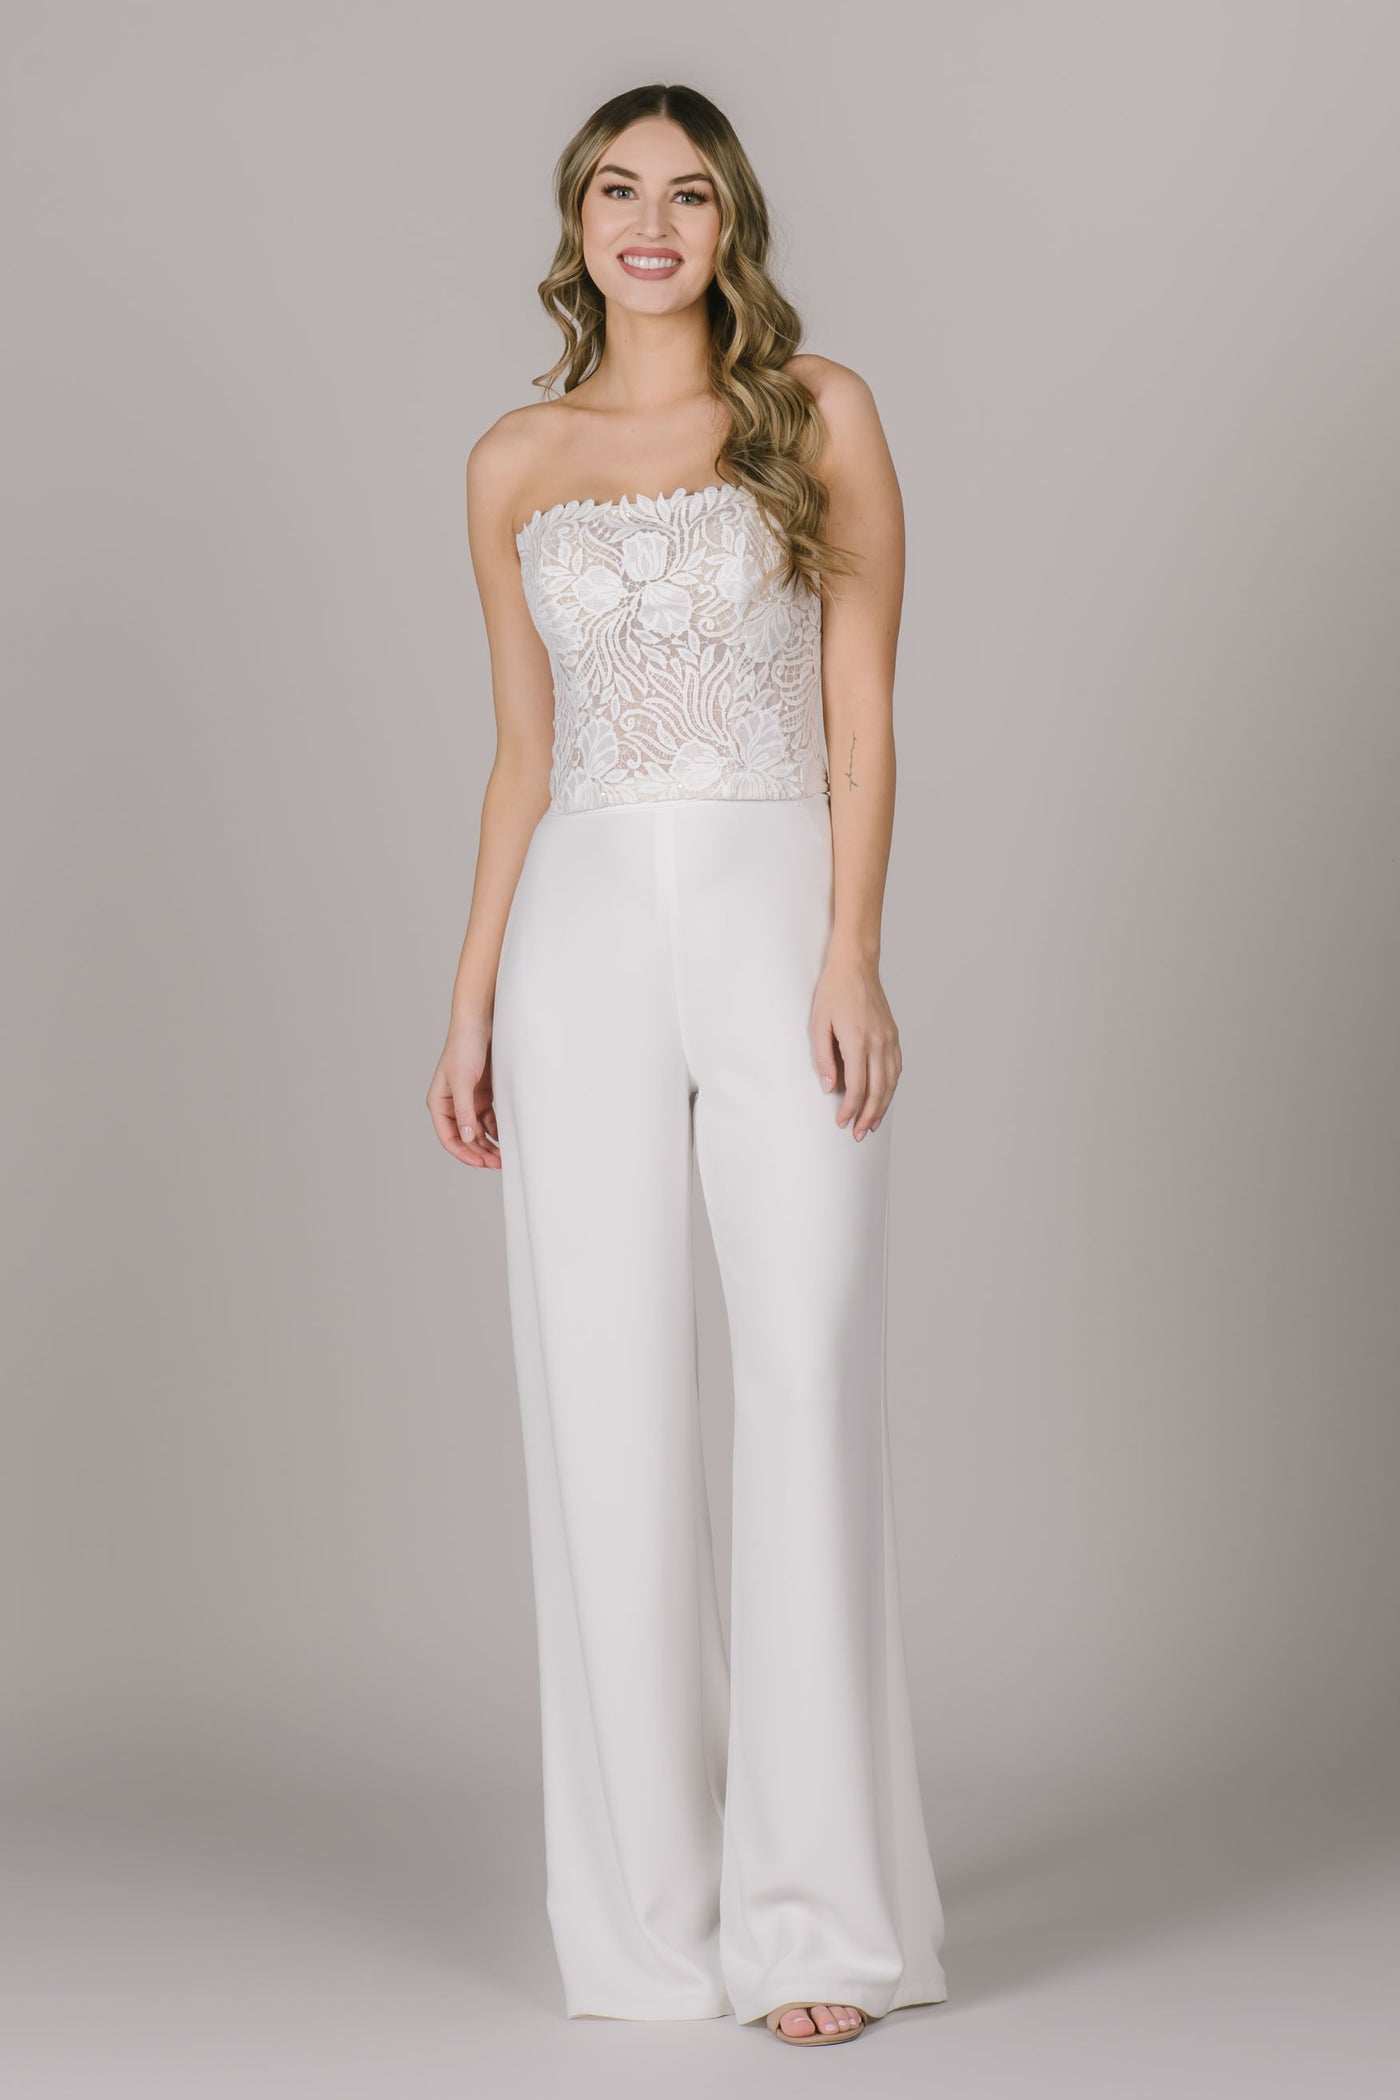 A stunning two piece jumpsuit with a sleeveless lace top and flowy white pants. The underlay on the top is nude which makes the lace stand out so well!